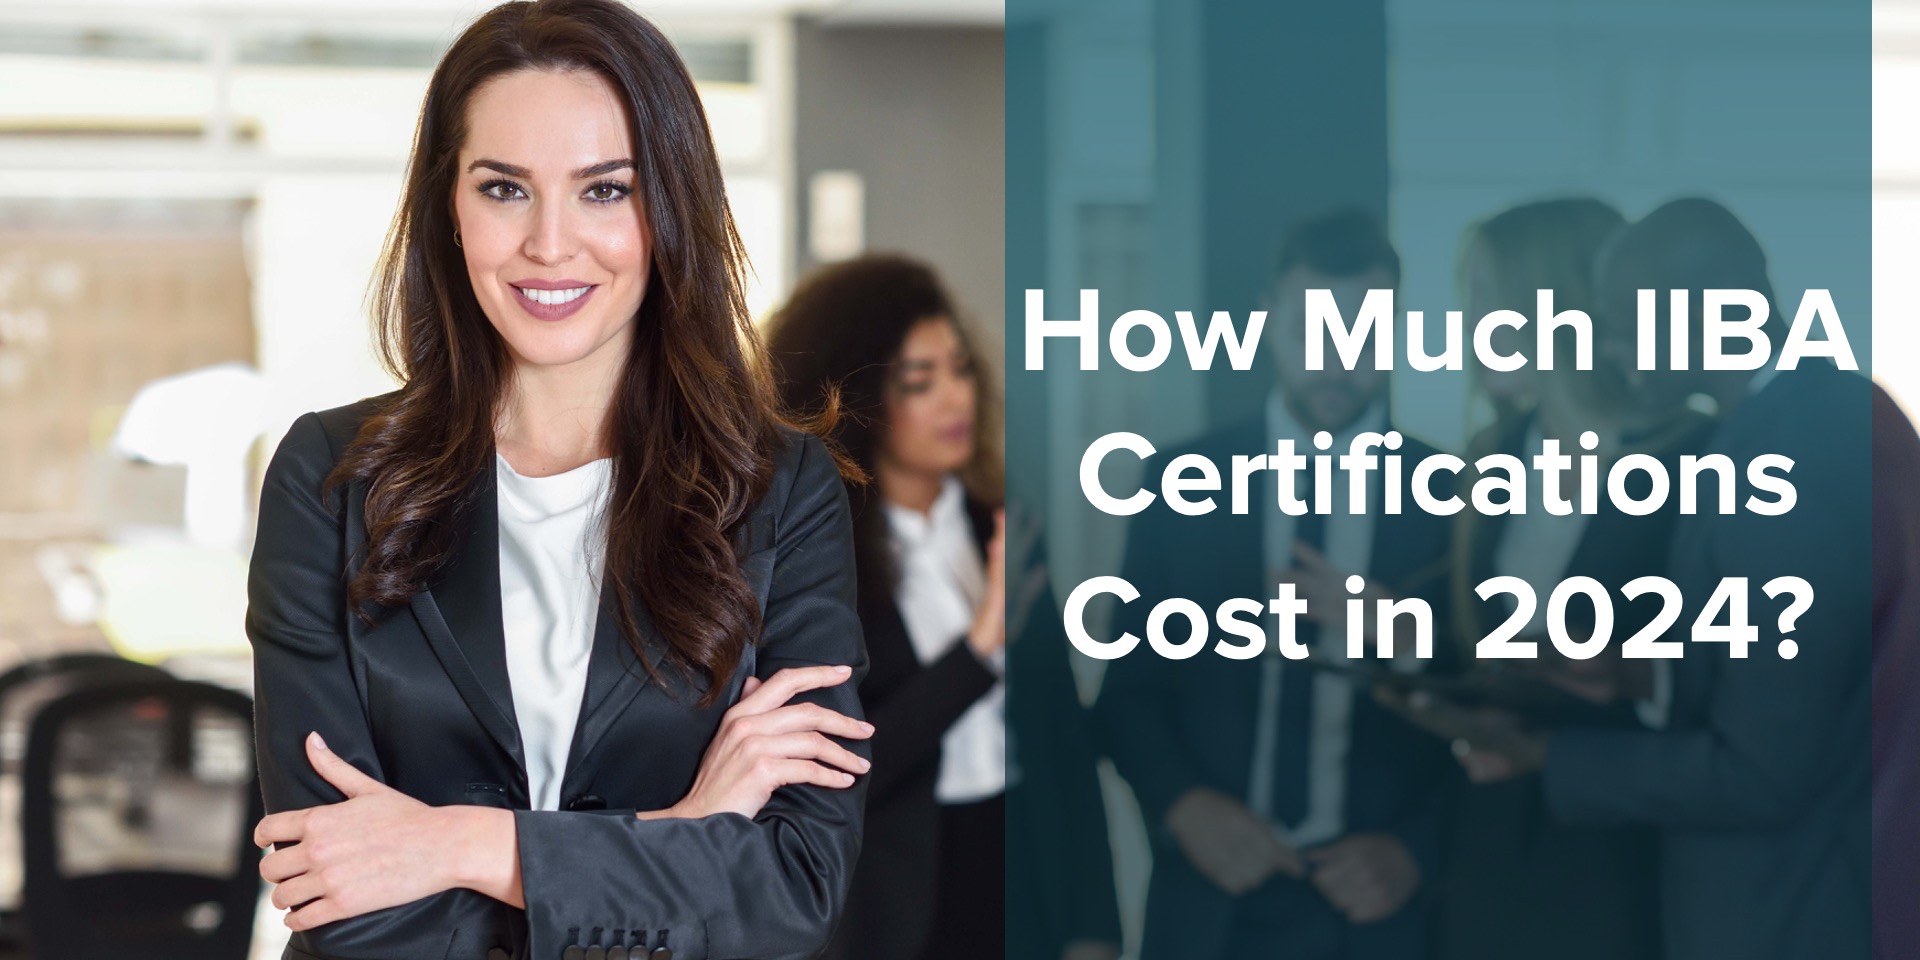 How Much IIBA Certifications Cost in 2024